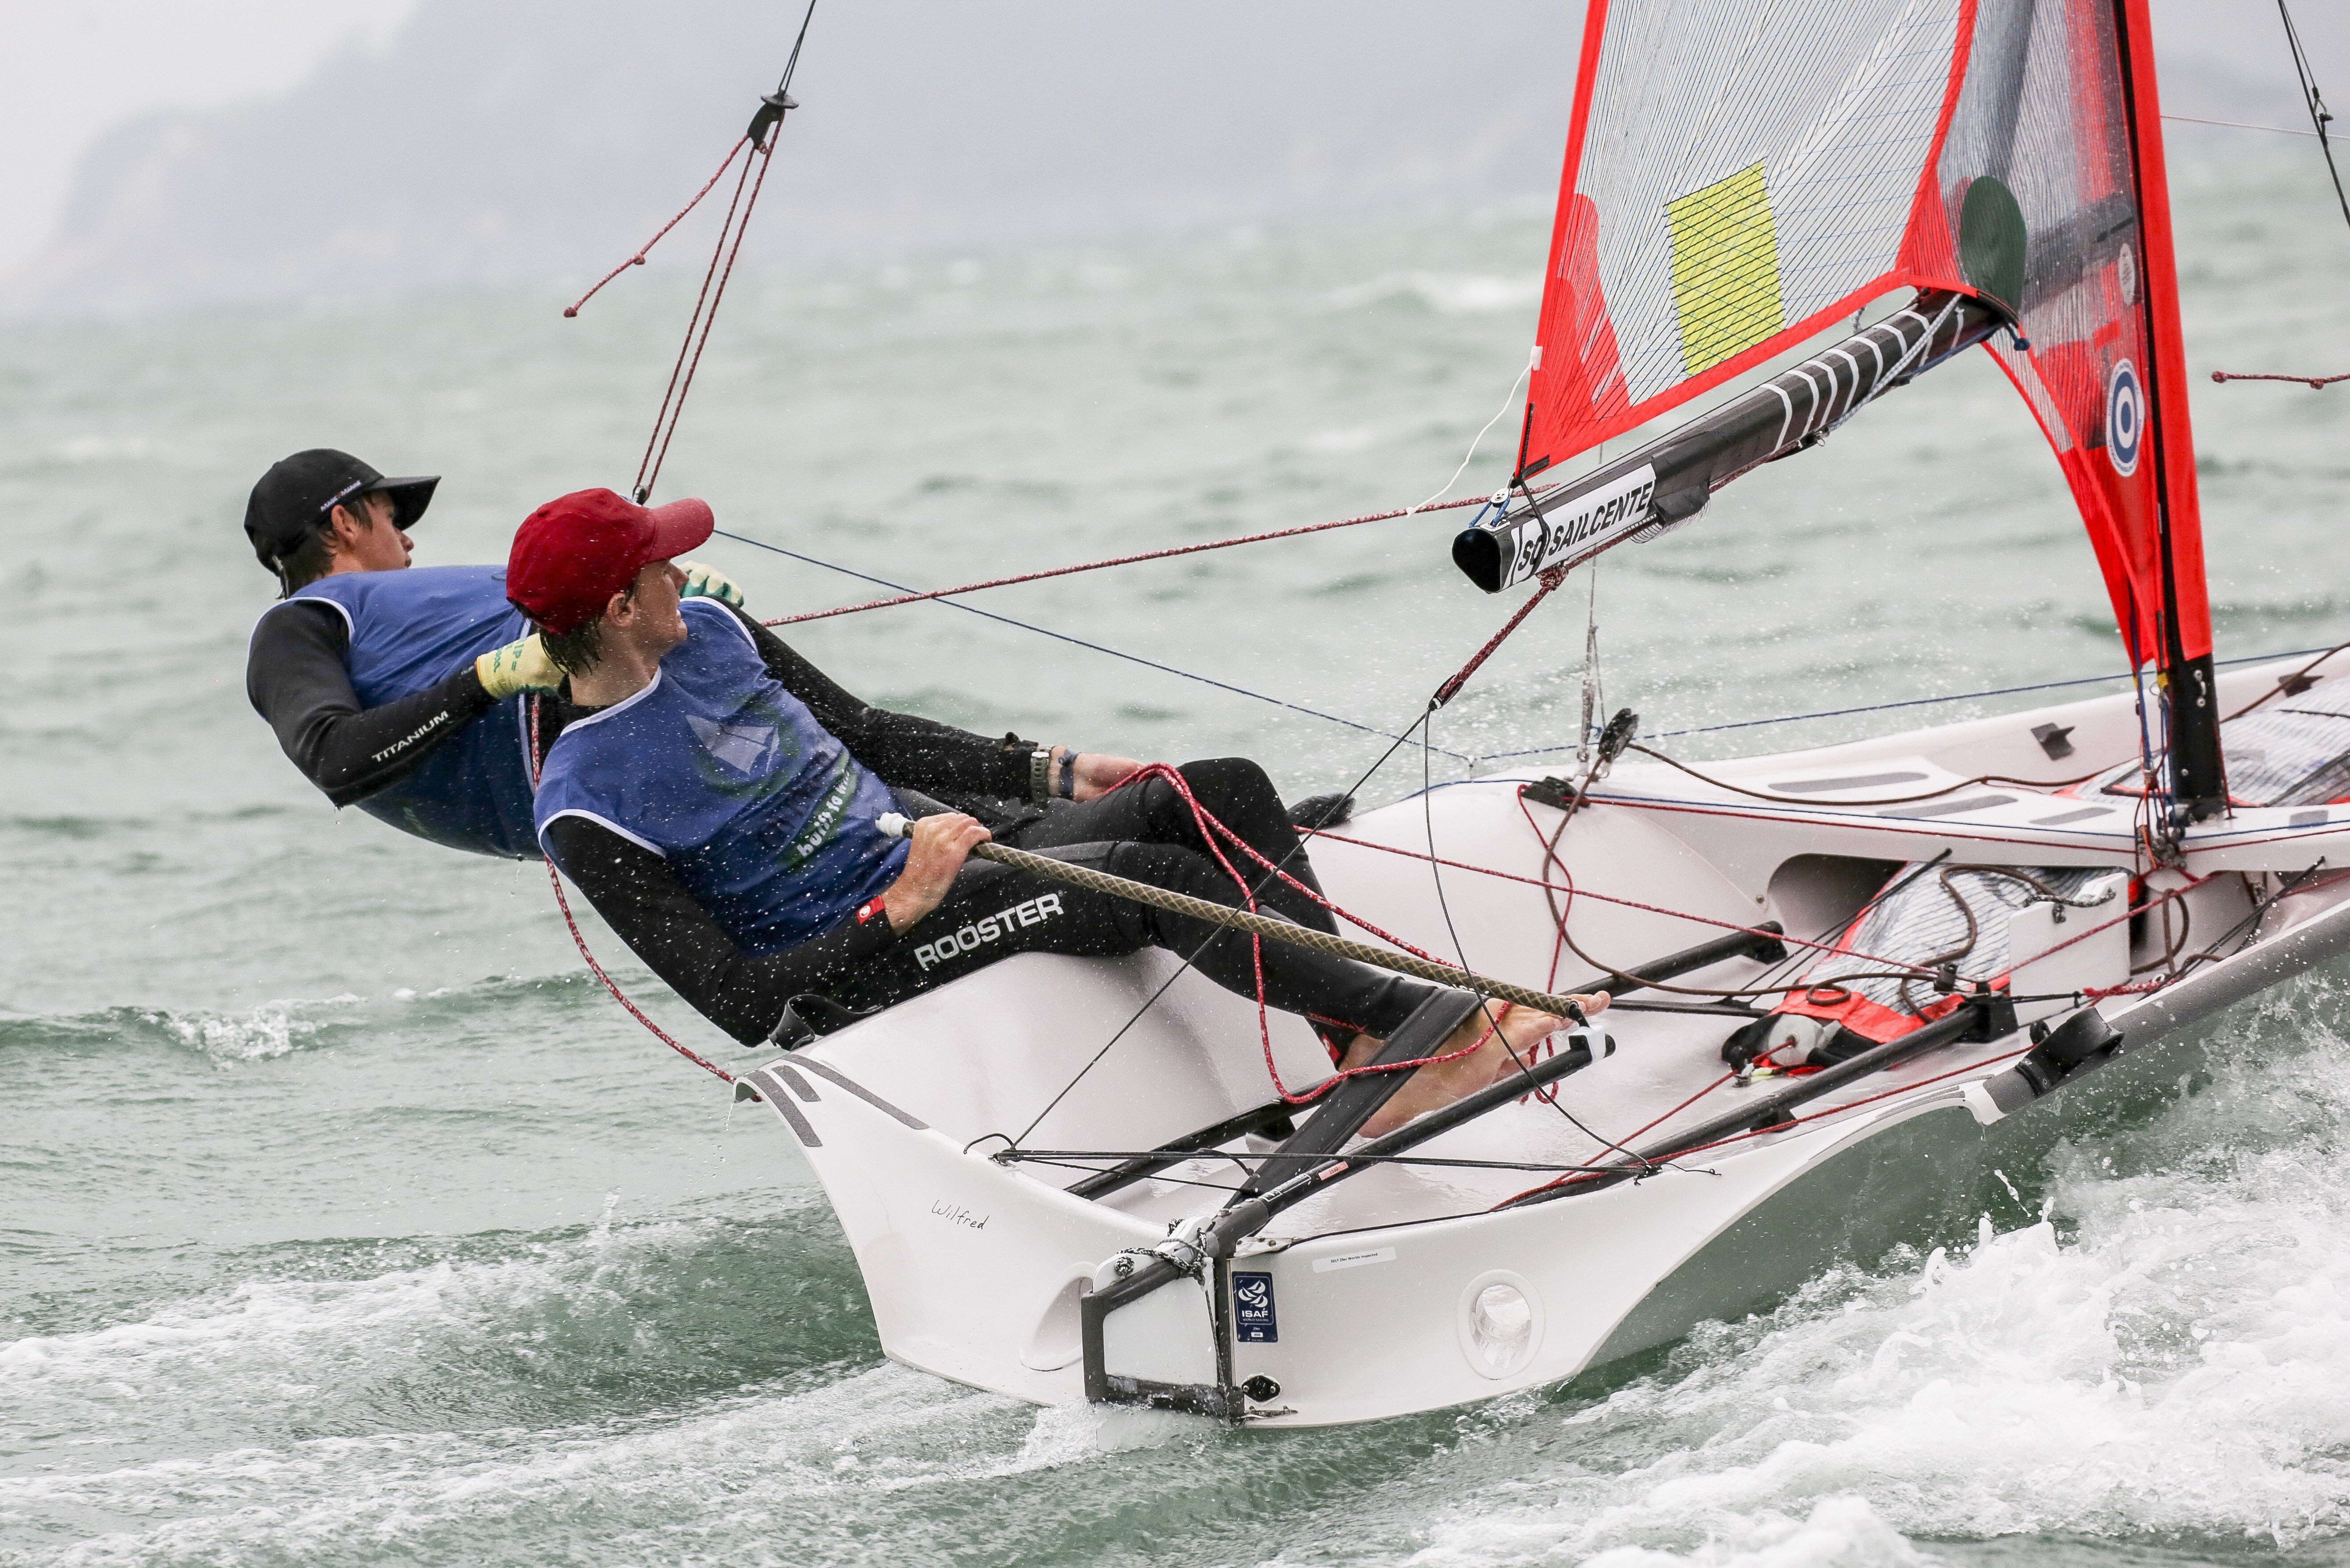 Calum Gregor (red cap) says sailing gives you “a sense of freedom, like nothing else”. Photo: Handout